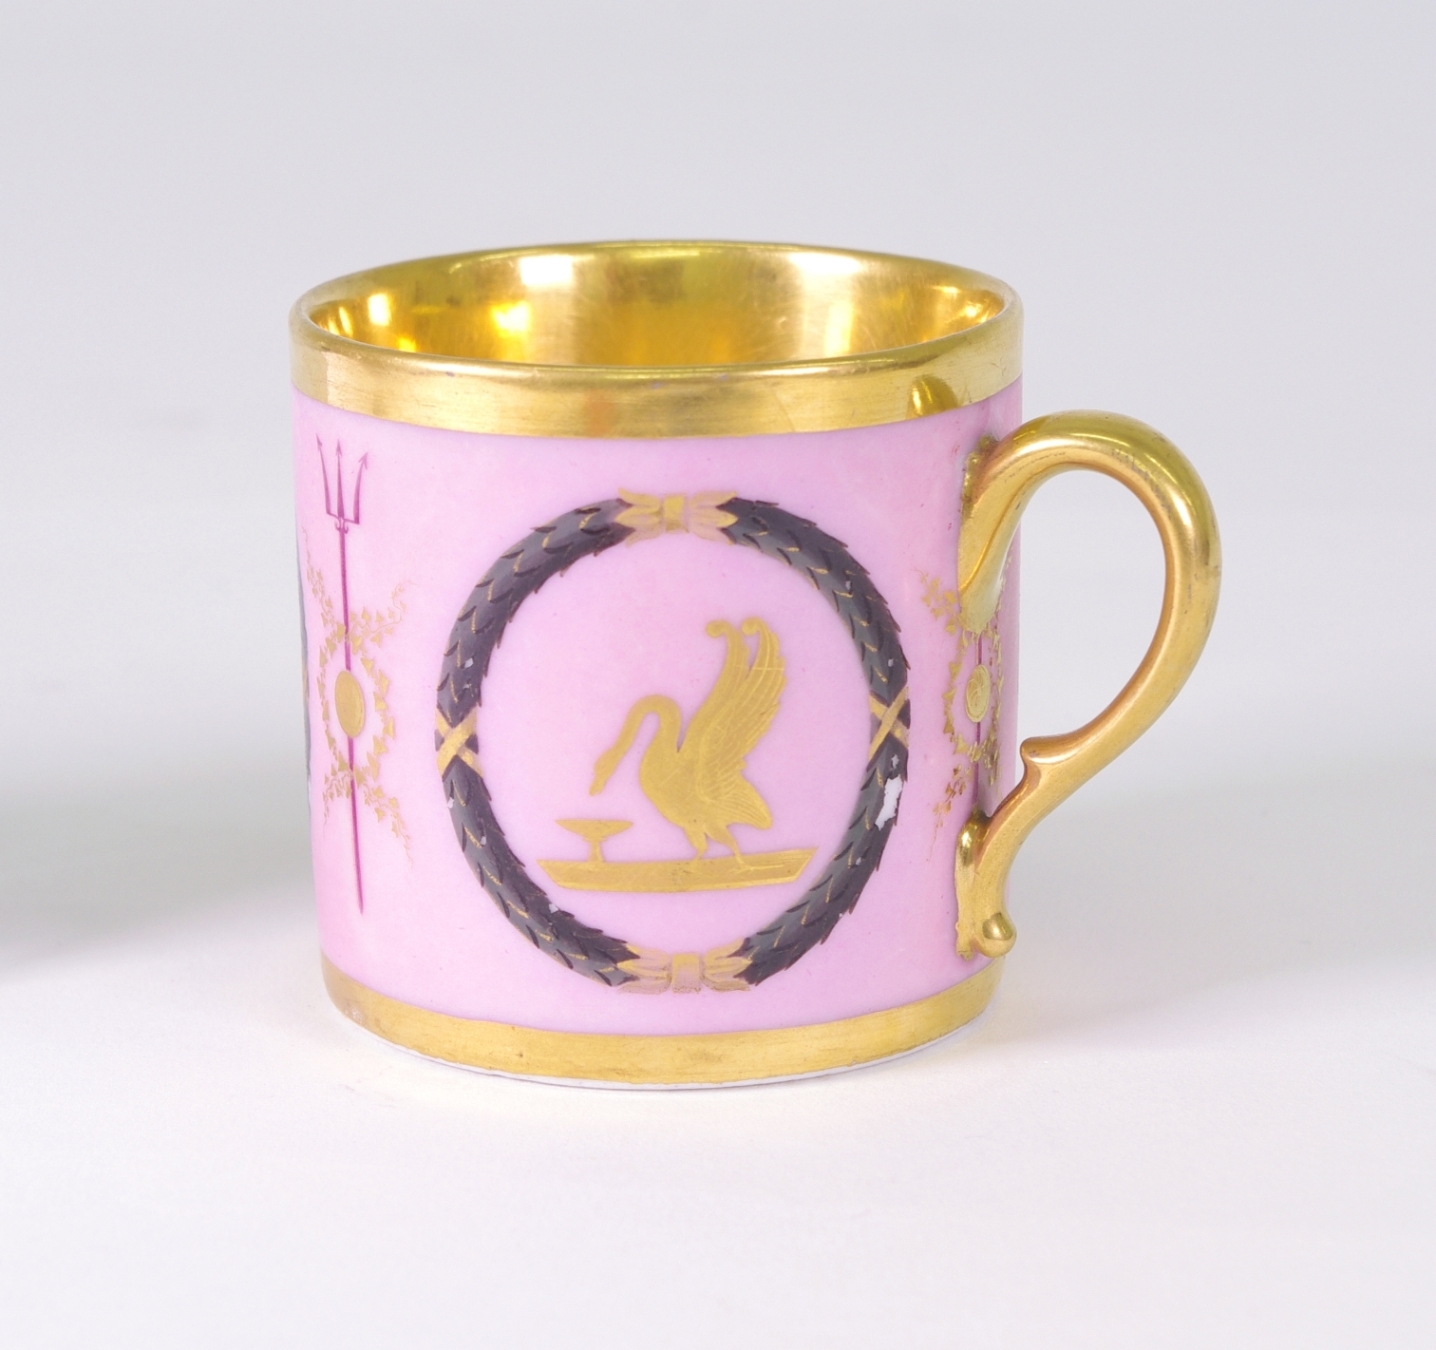 Old Paris Coffee Can and Saucer, c. 1810